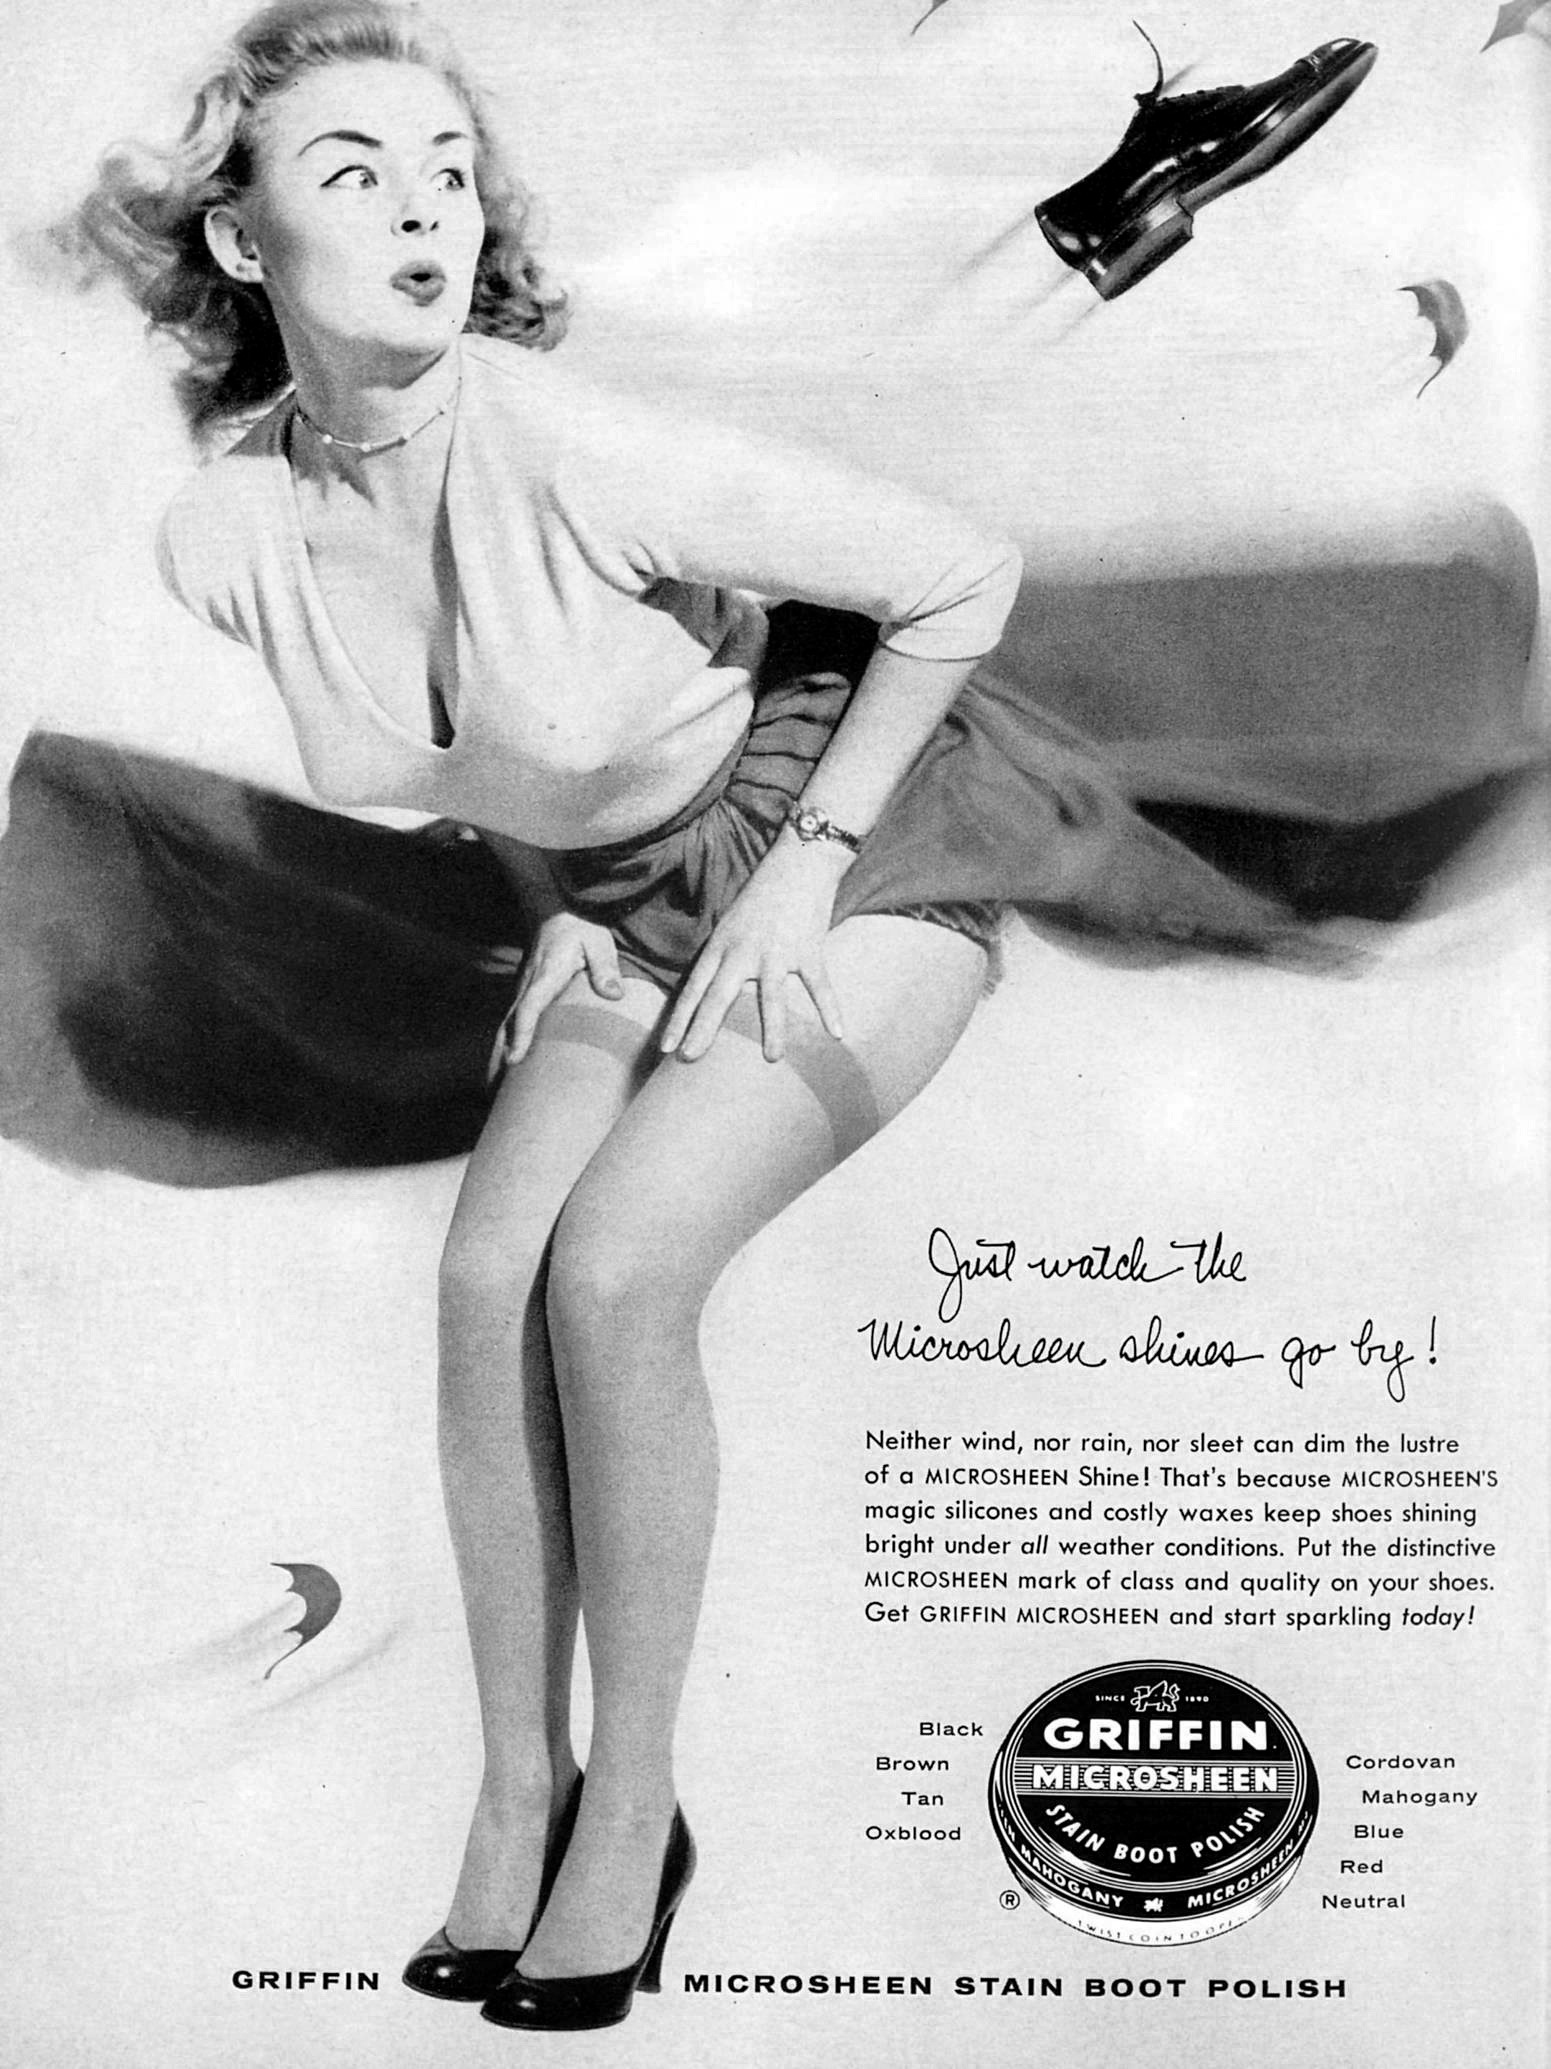 Griffin Microsheen Stain Boot Polish - 1957